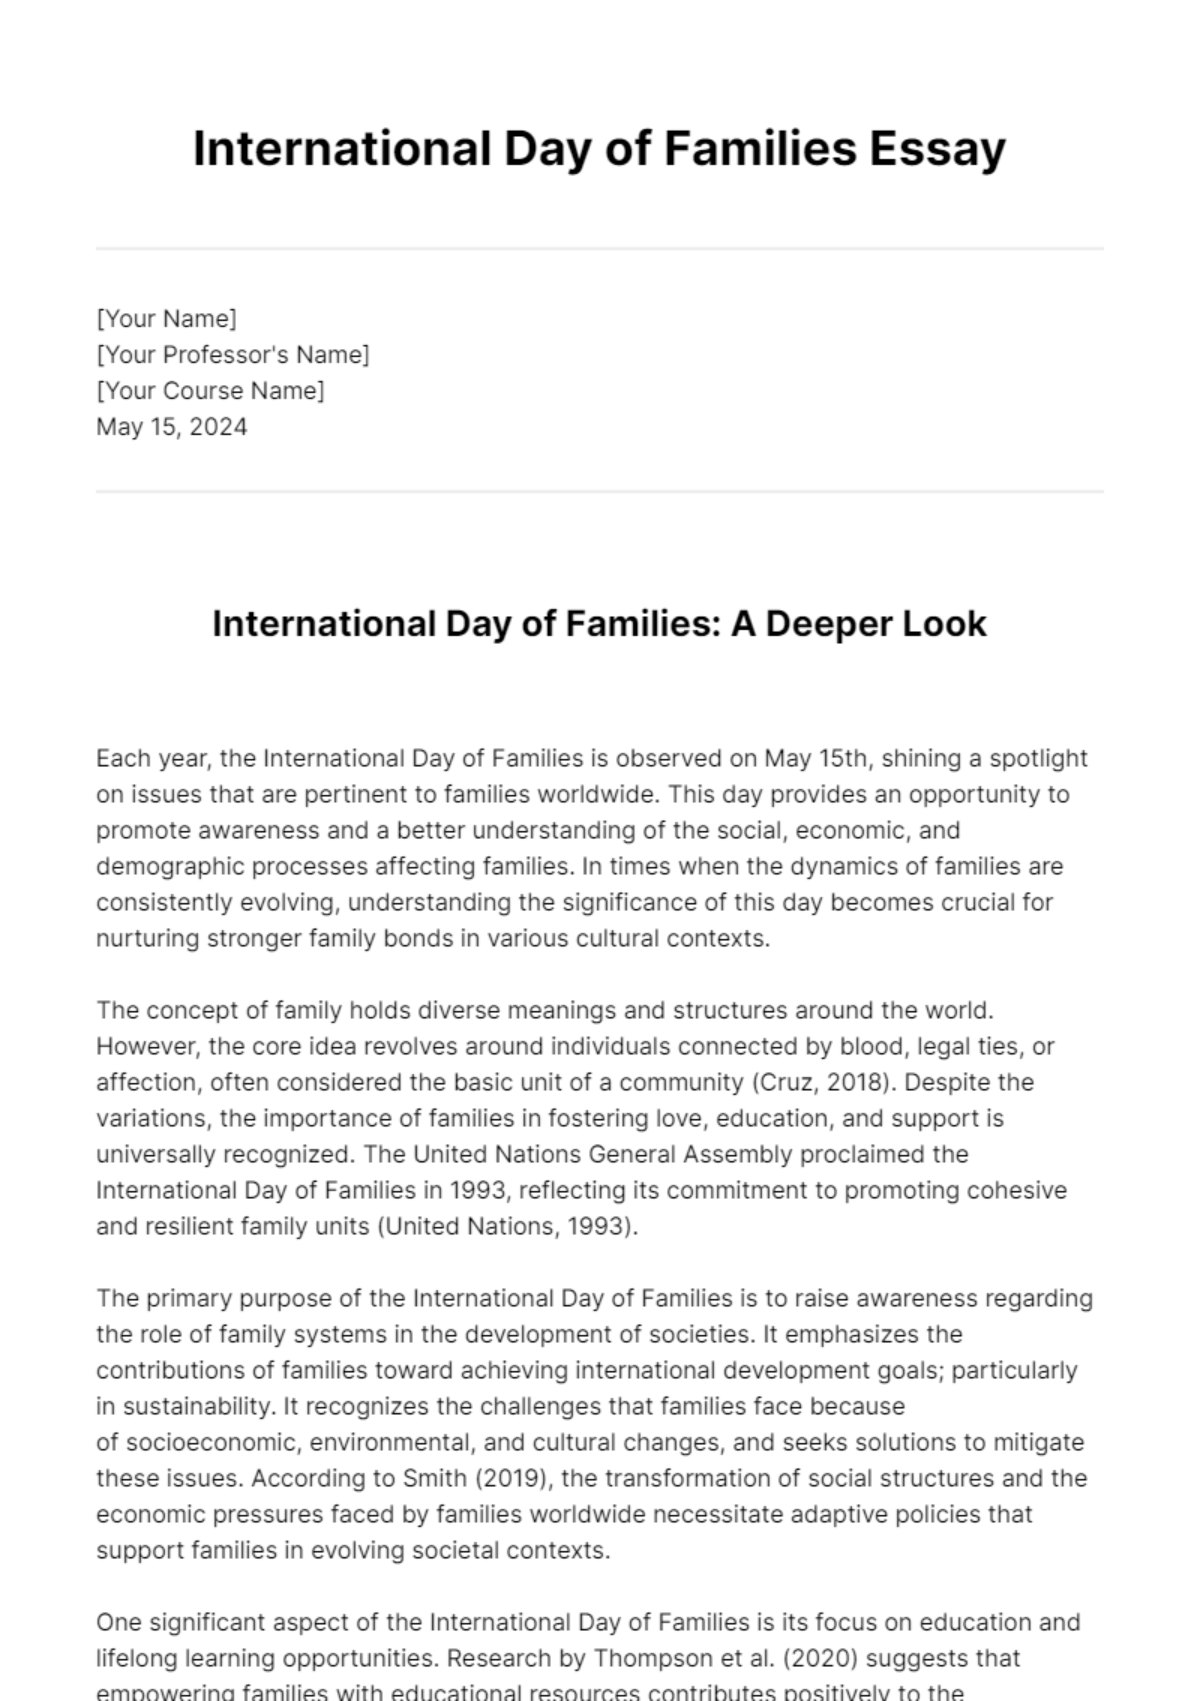 International Day of Families Essay Template